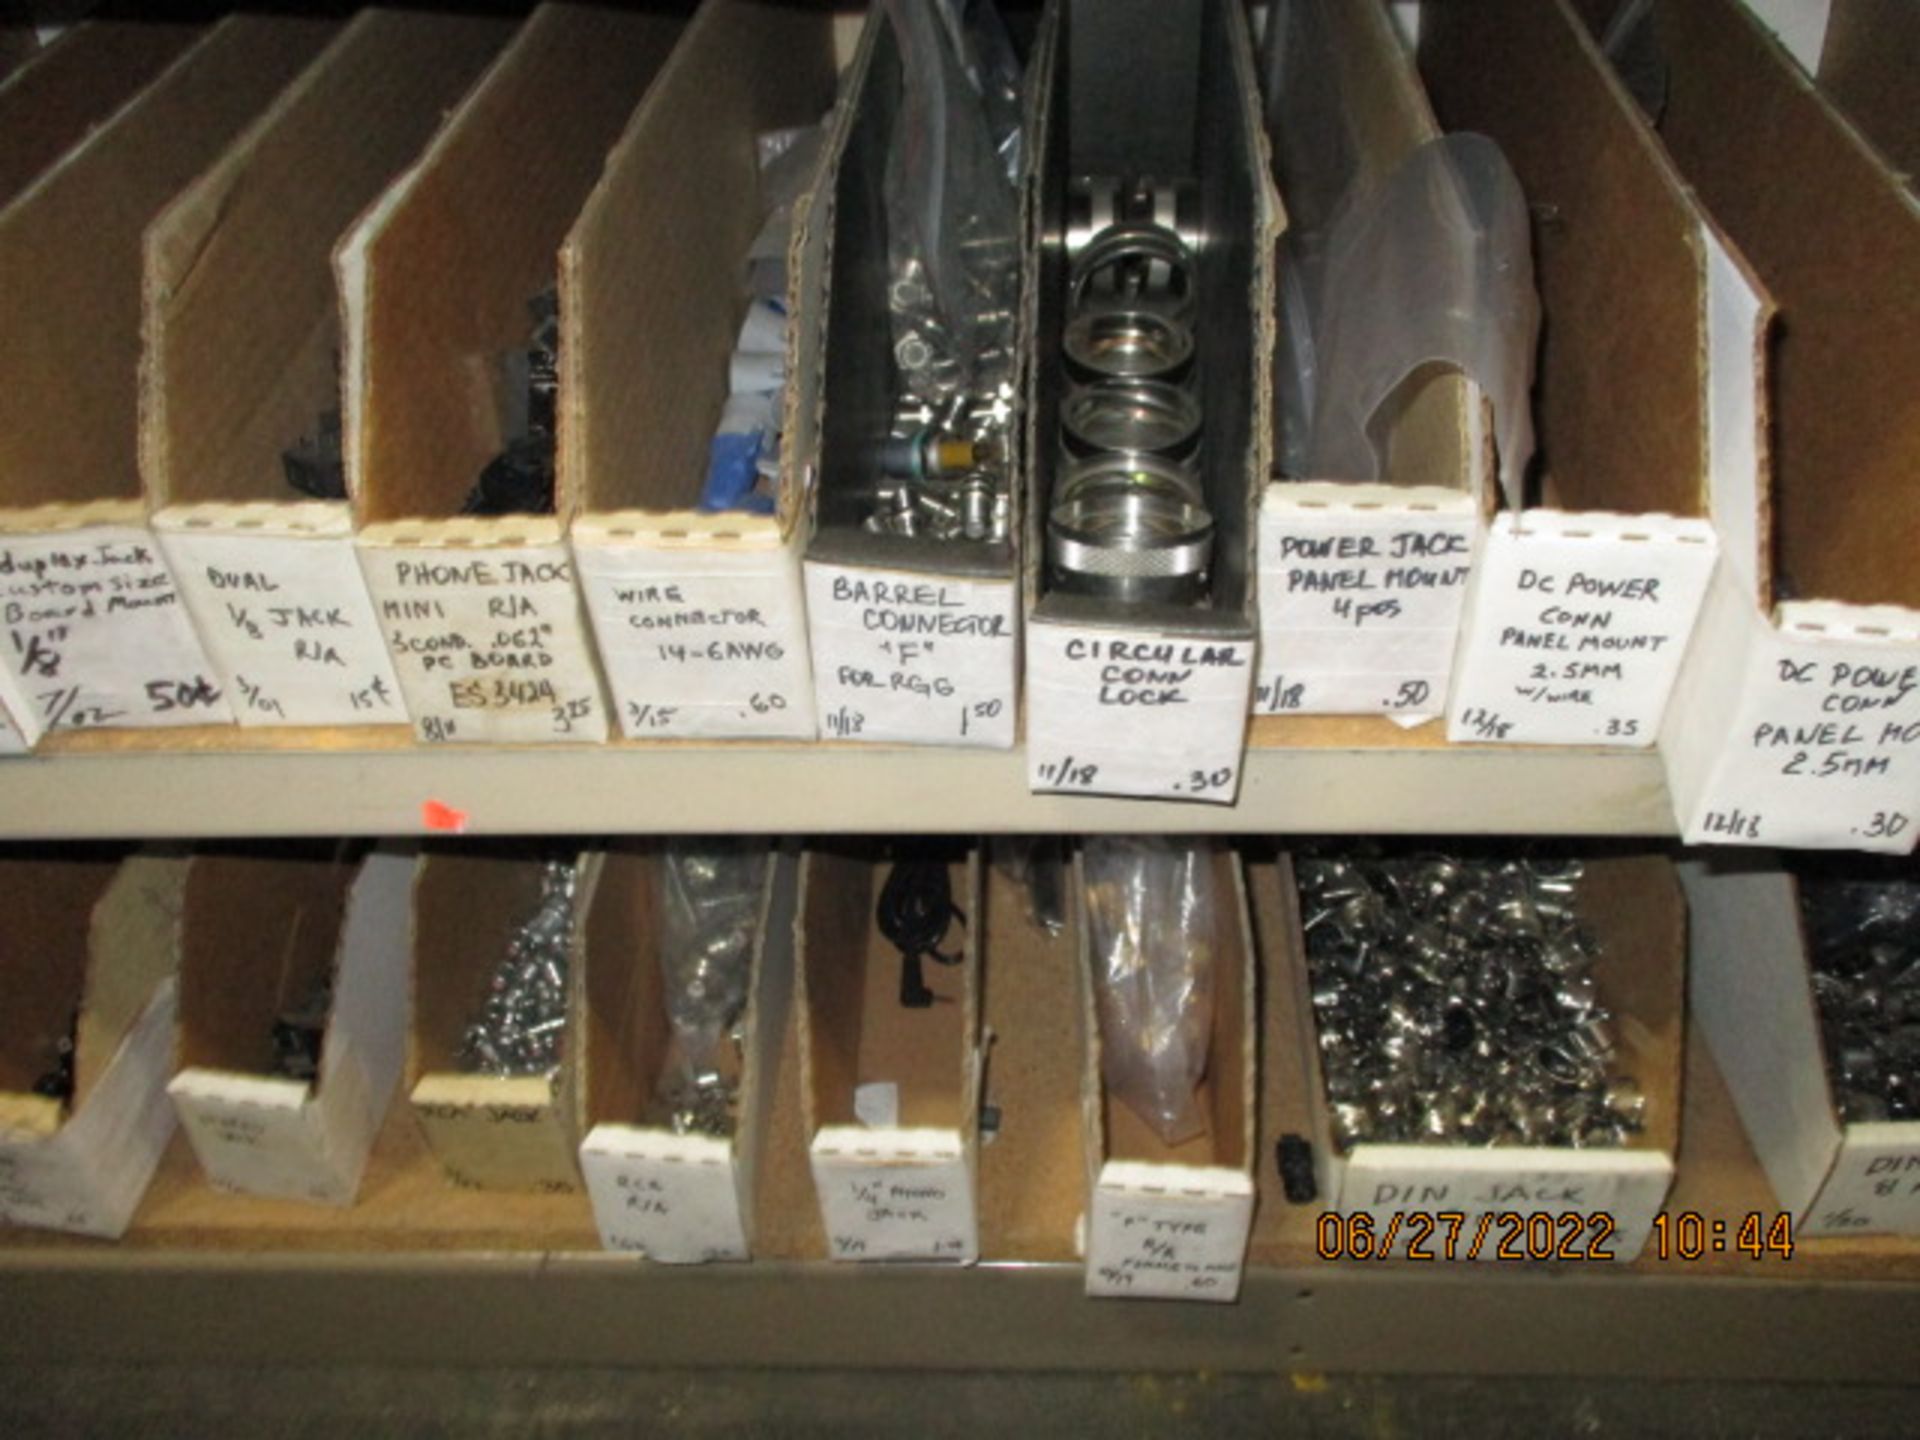 CONTENTS OF SHELVING UNIT CONSISTING OF RCA JACKS, RCA CONNECTORS GOLD, RCA DUAL IN/OUT JACKS, - Image 7 of 7